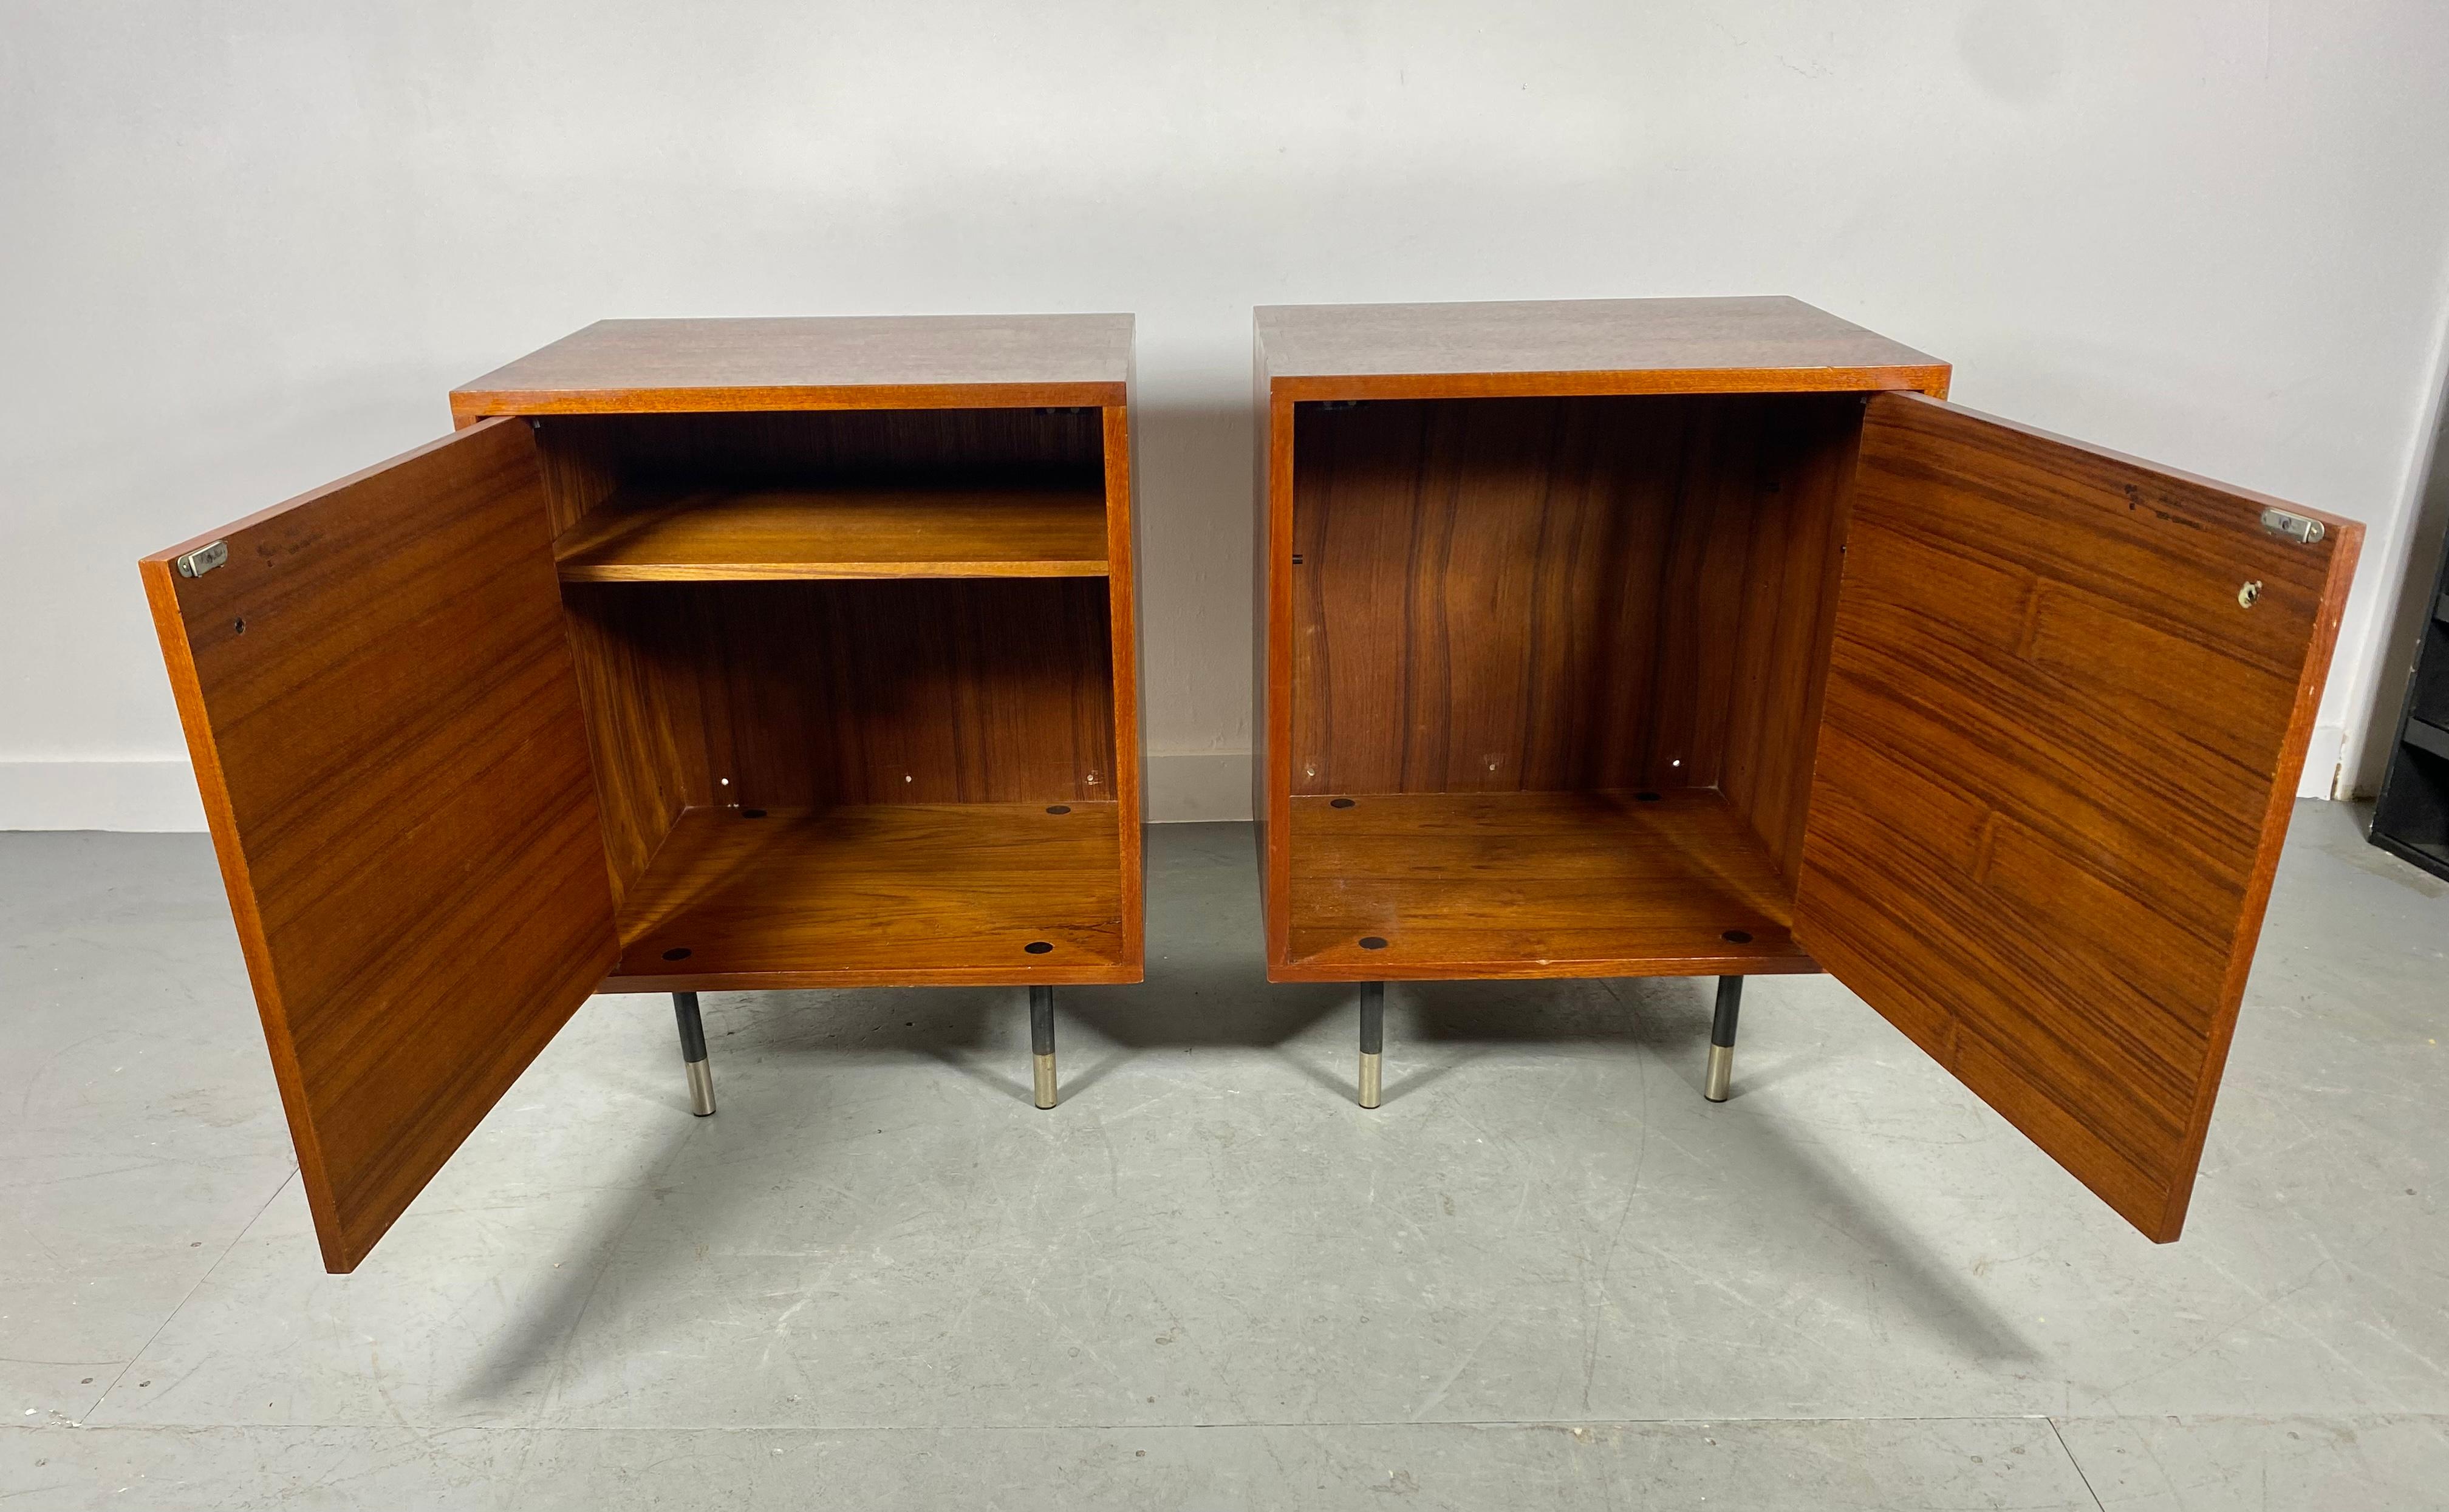 Handsome pair of nite stands, end tables, cabinets, Made in Italy, Classic Italian Modernist design. Great design and proportions. Inlay joinery to top and sides.